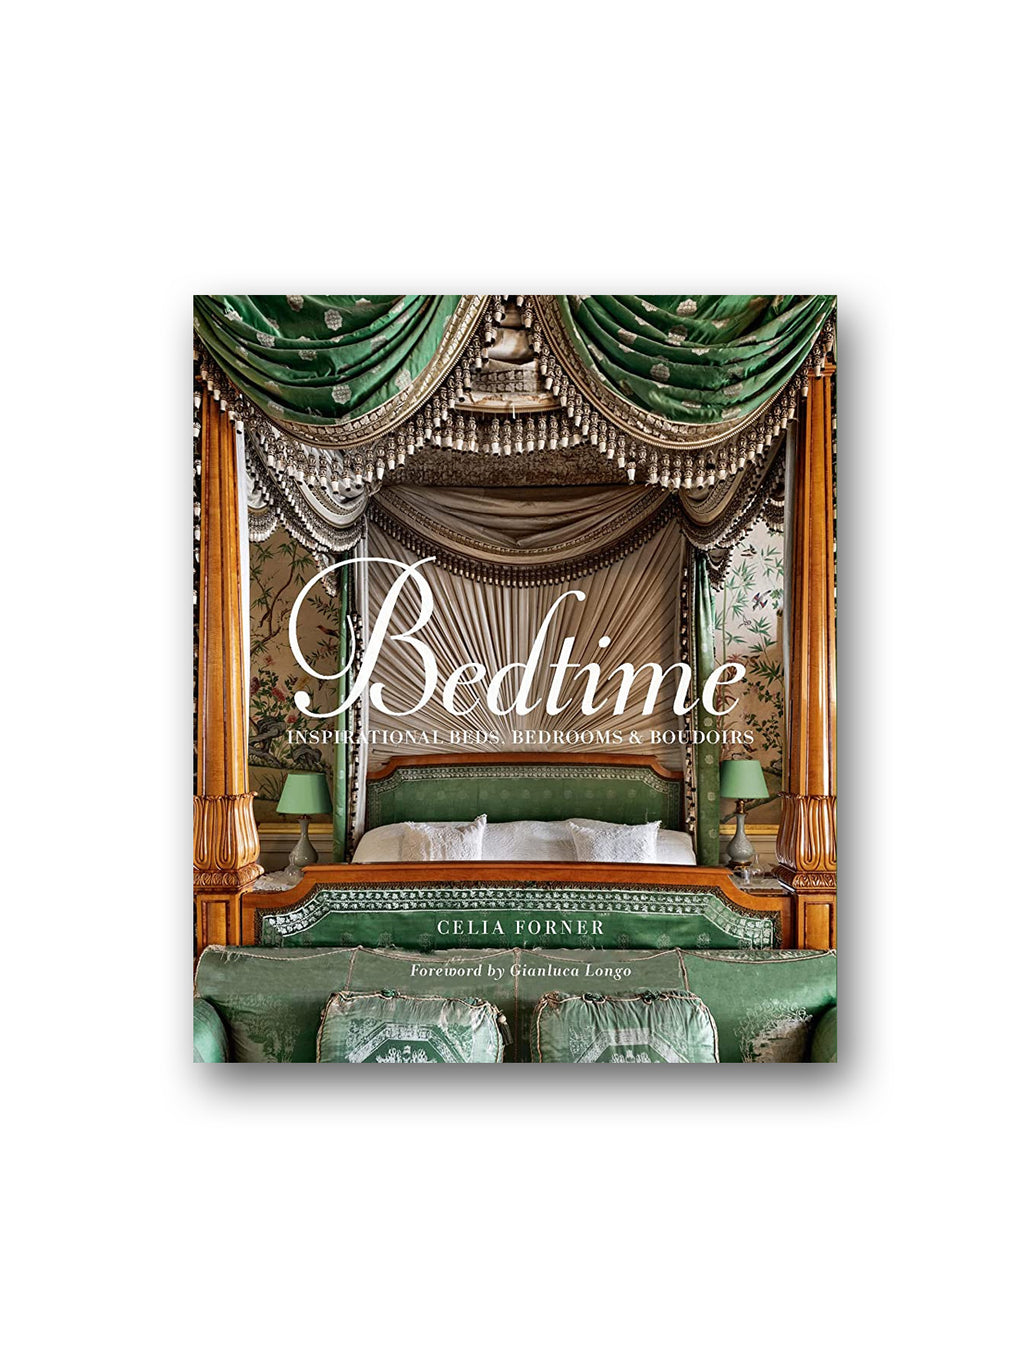 Bedtime : Inspirational Beds, Bedrooms & Boudoirs